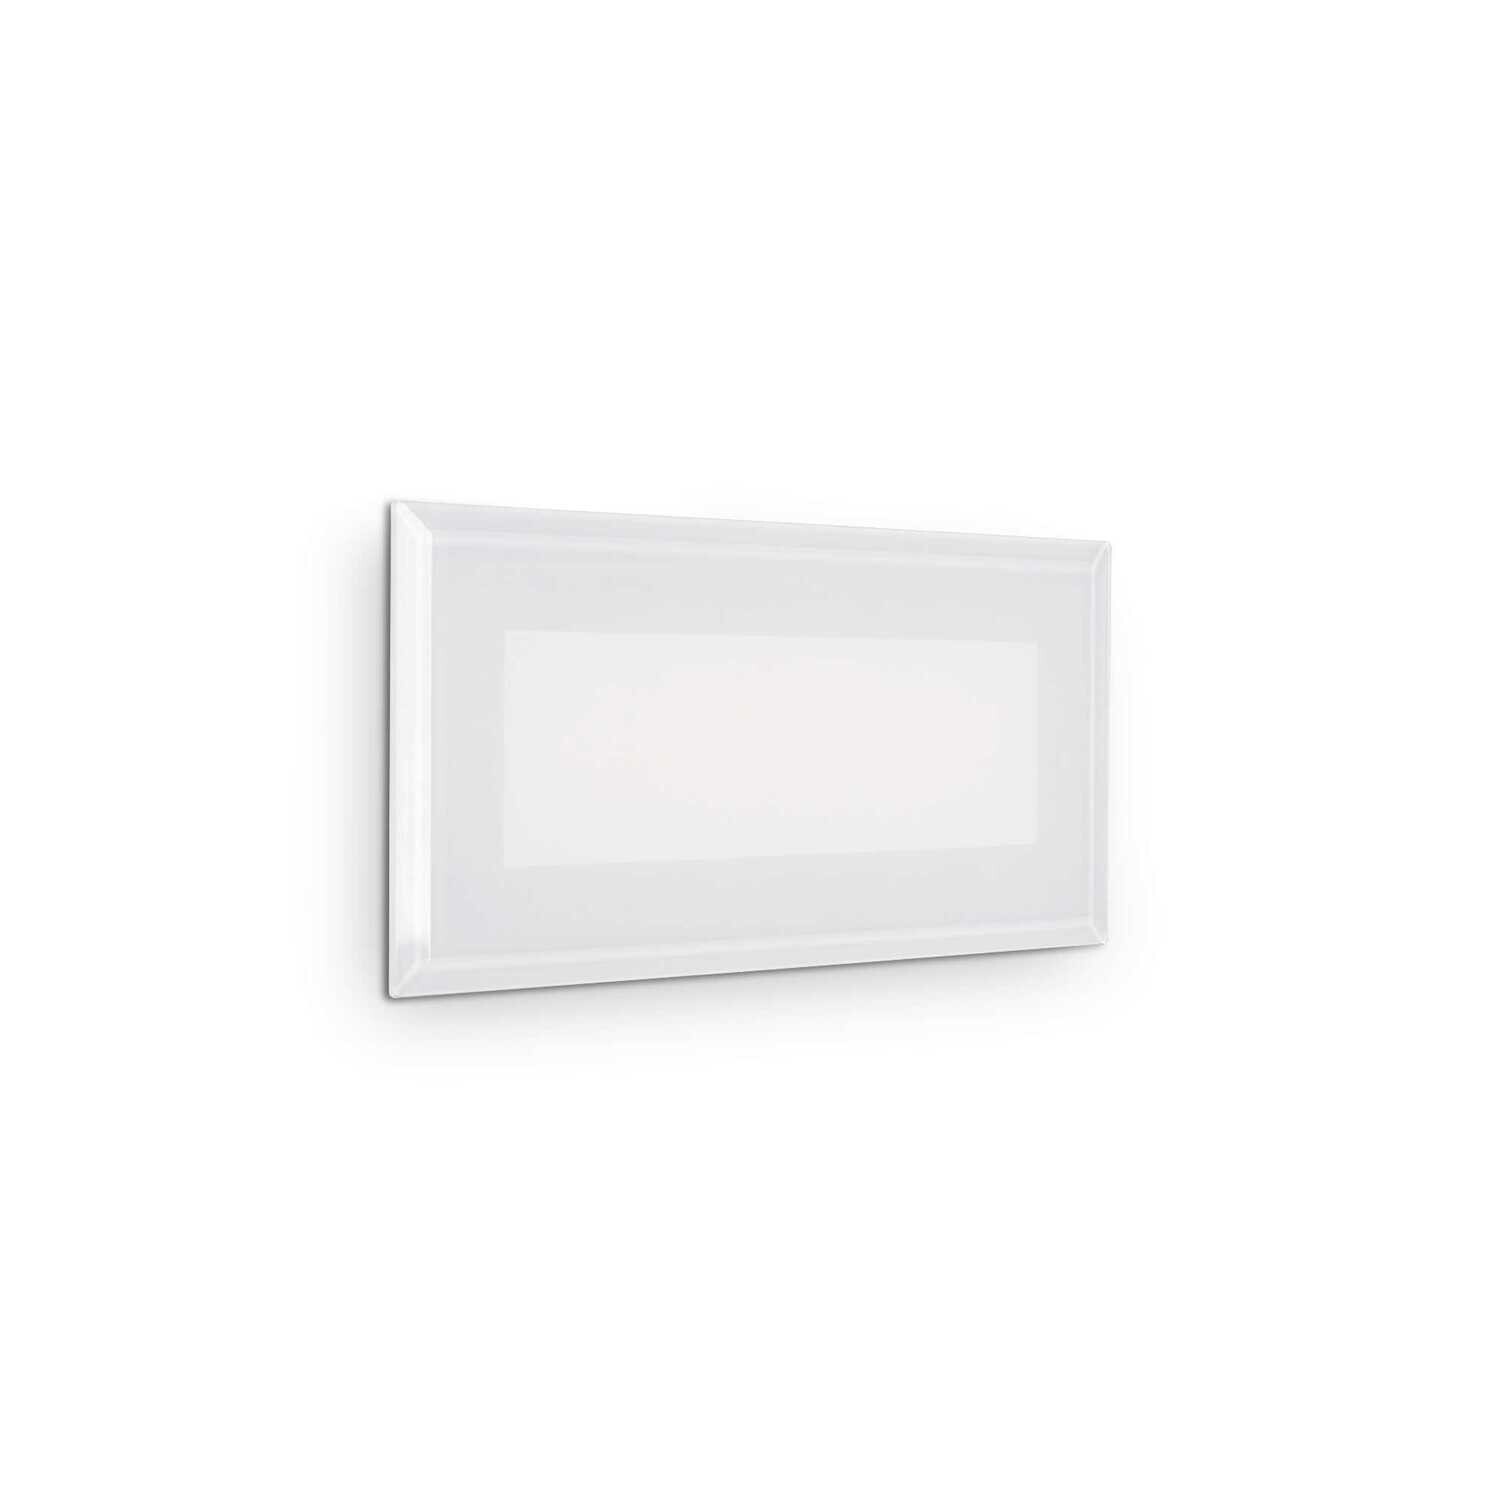 INDIO Recessed Rectangular Wall Lamp, 1x8W LED, 960lm IP65 White